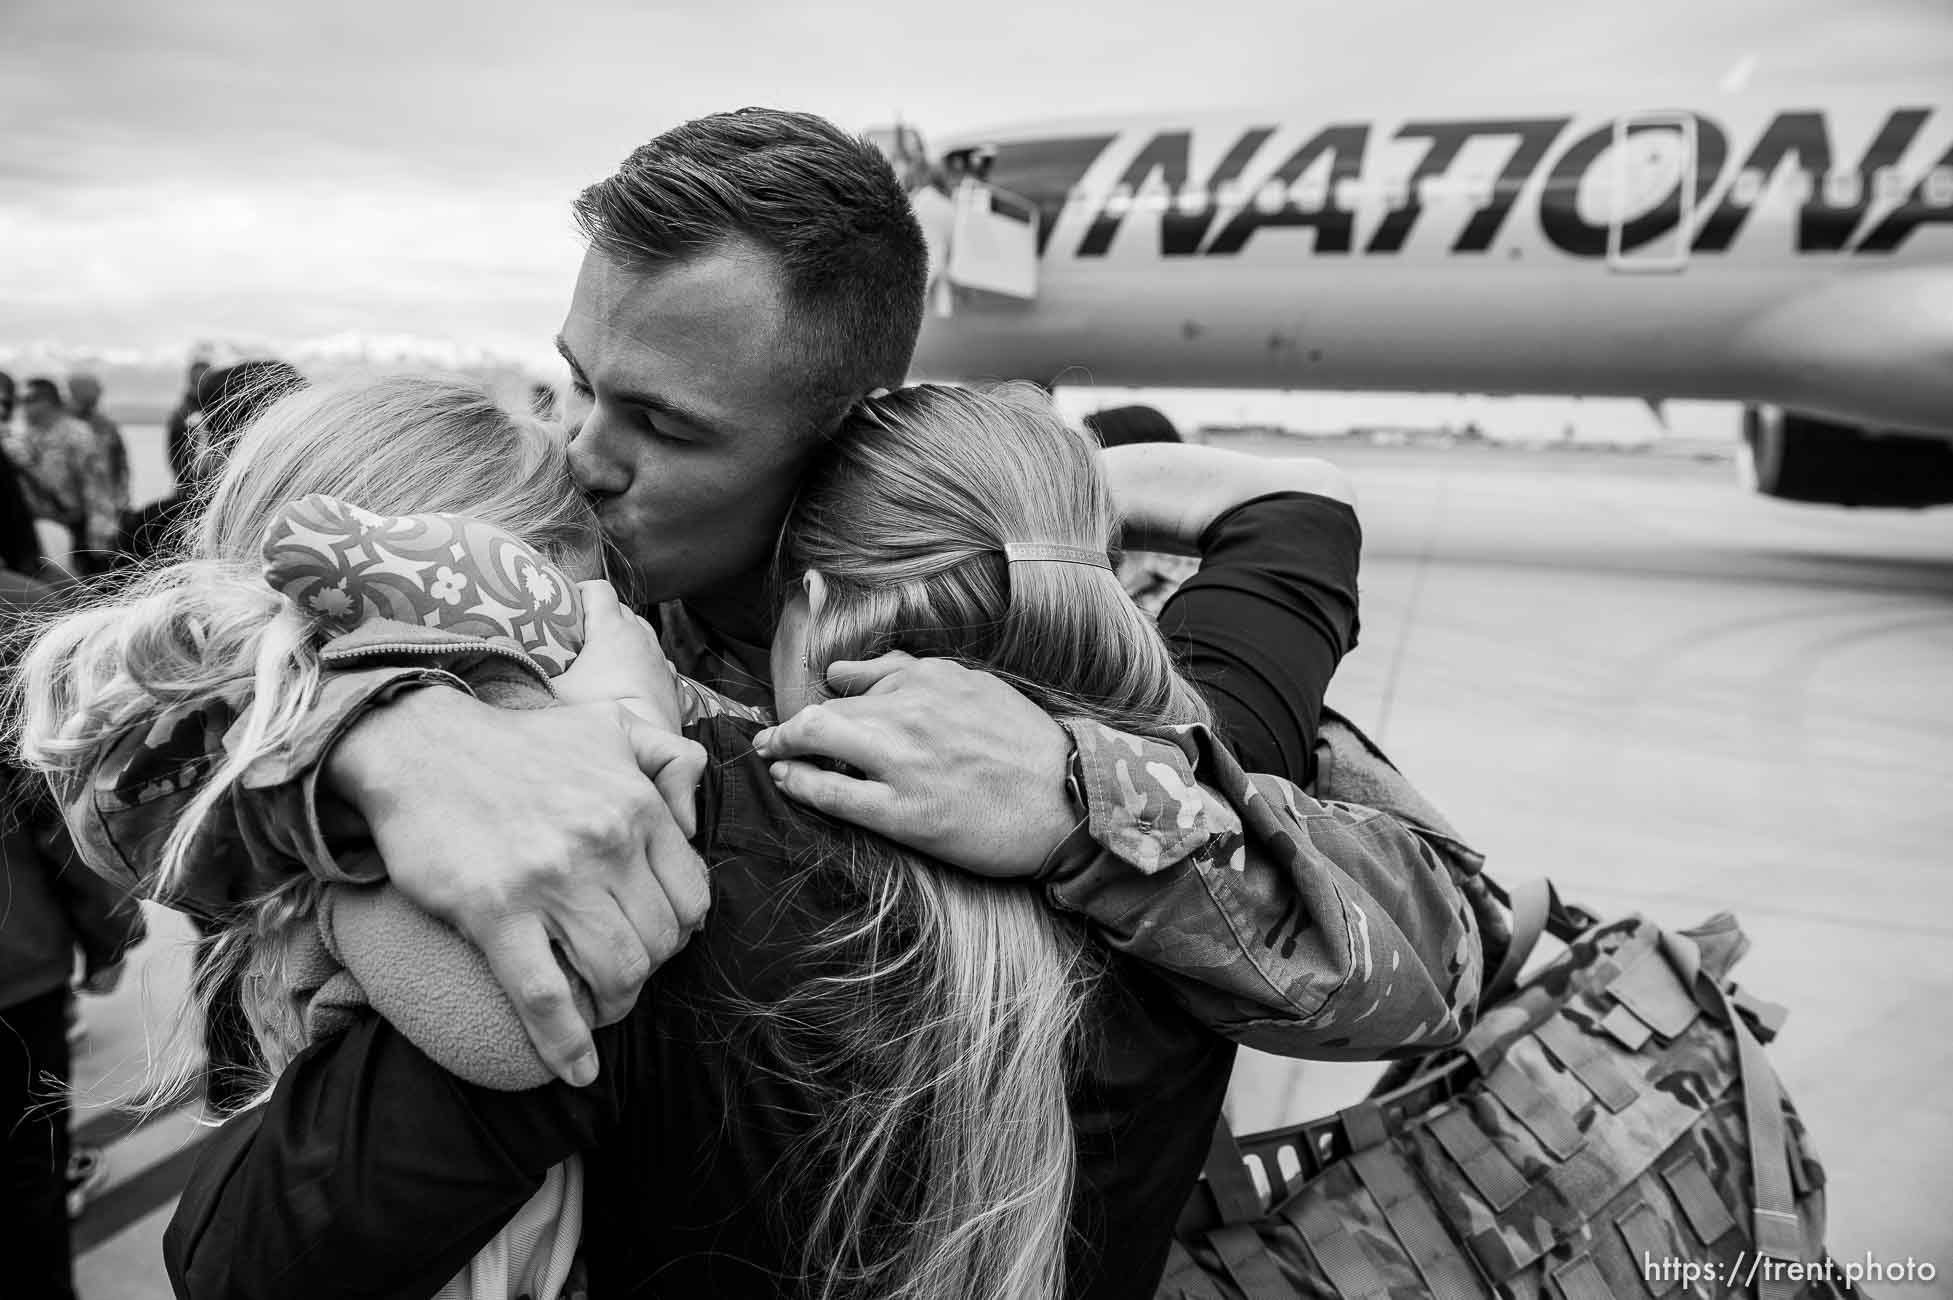 (Trent Nelson  |  The Salt Lake Tribune)  
Sergeant Chris Jackson is welcomed home by his wife Kalee and daughter Emma as almost 100 Soldiers from Utah Army National Guard’s Echo Battery, 1st Battalion, 145th Field Artillery, “Big Red” return after a 10-month Middle East deployment, on Tuesday April 9, 2019 at Wright Air Base in Salt Lake City.